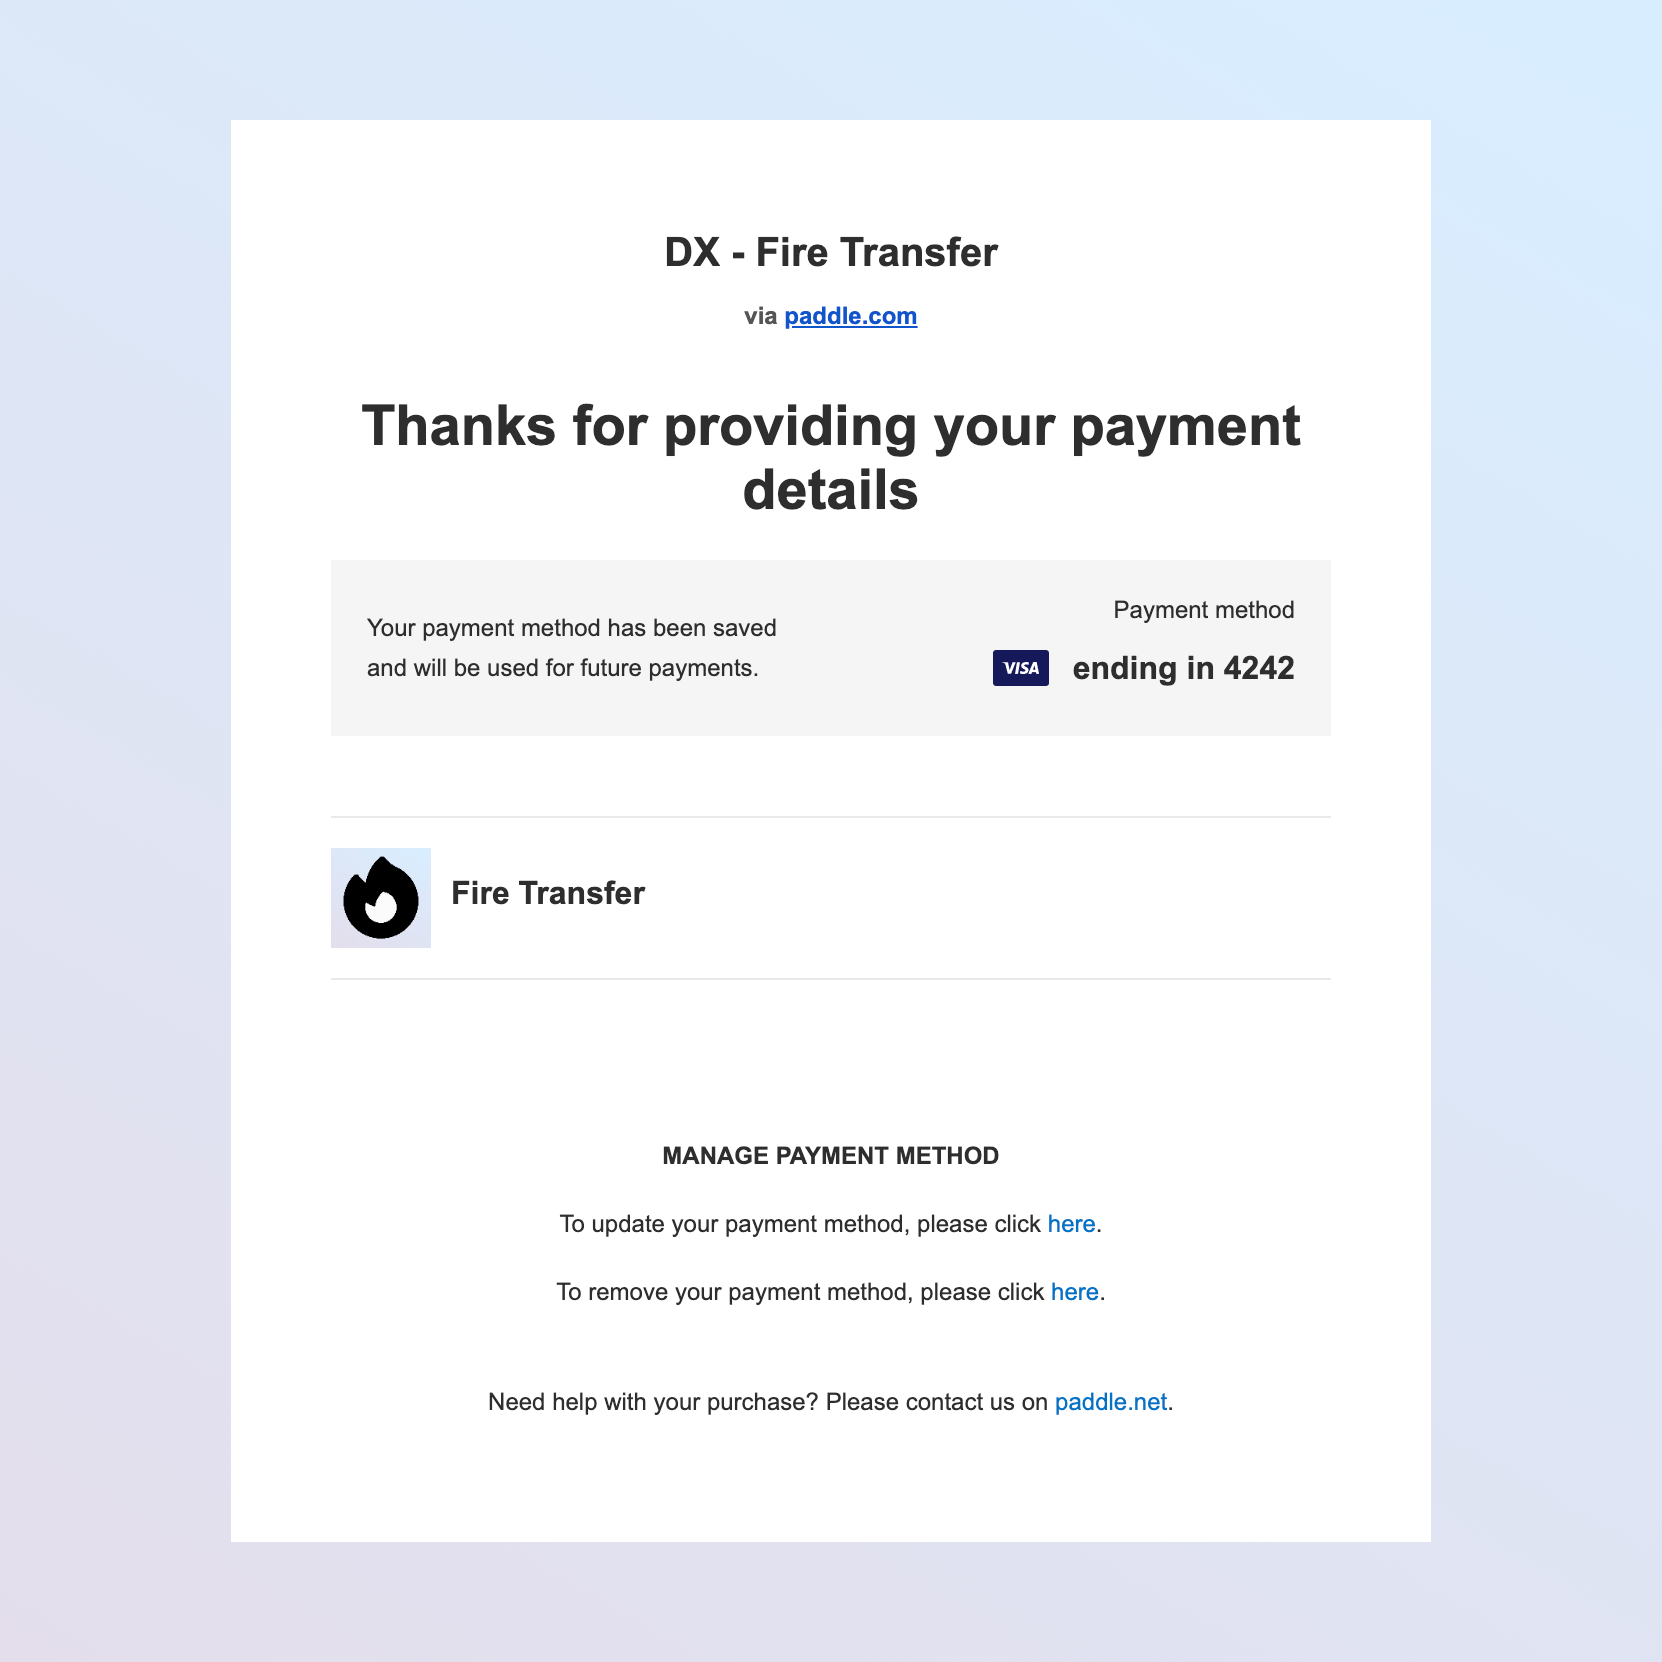 Screenshot of the new email. It says: 'Thanks for providing your payment details. Your payment method has been saved and will be used for future payments'. The payment method is listed, in this example it's a Visa ending 4242. Underneath, there is a list of items on the subscription. At the bottom of the email, there are links to update payment method or remove payment method.